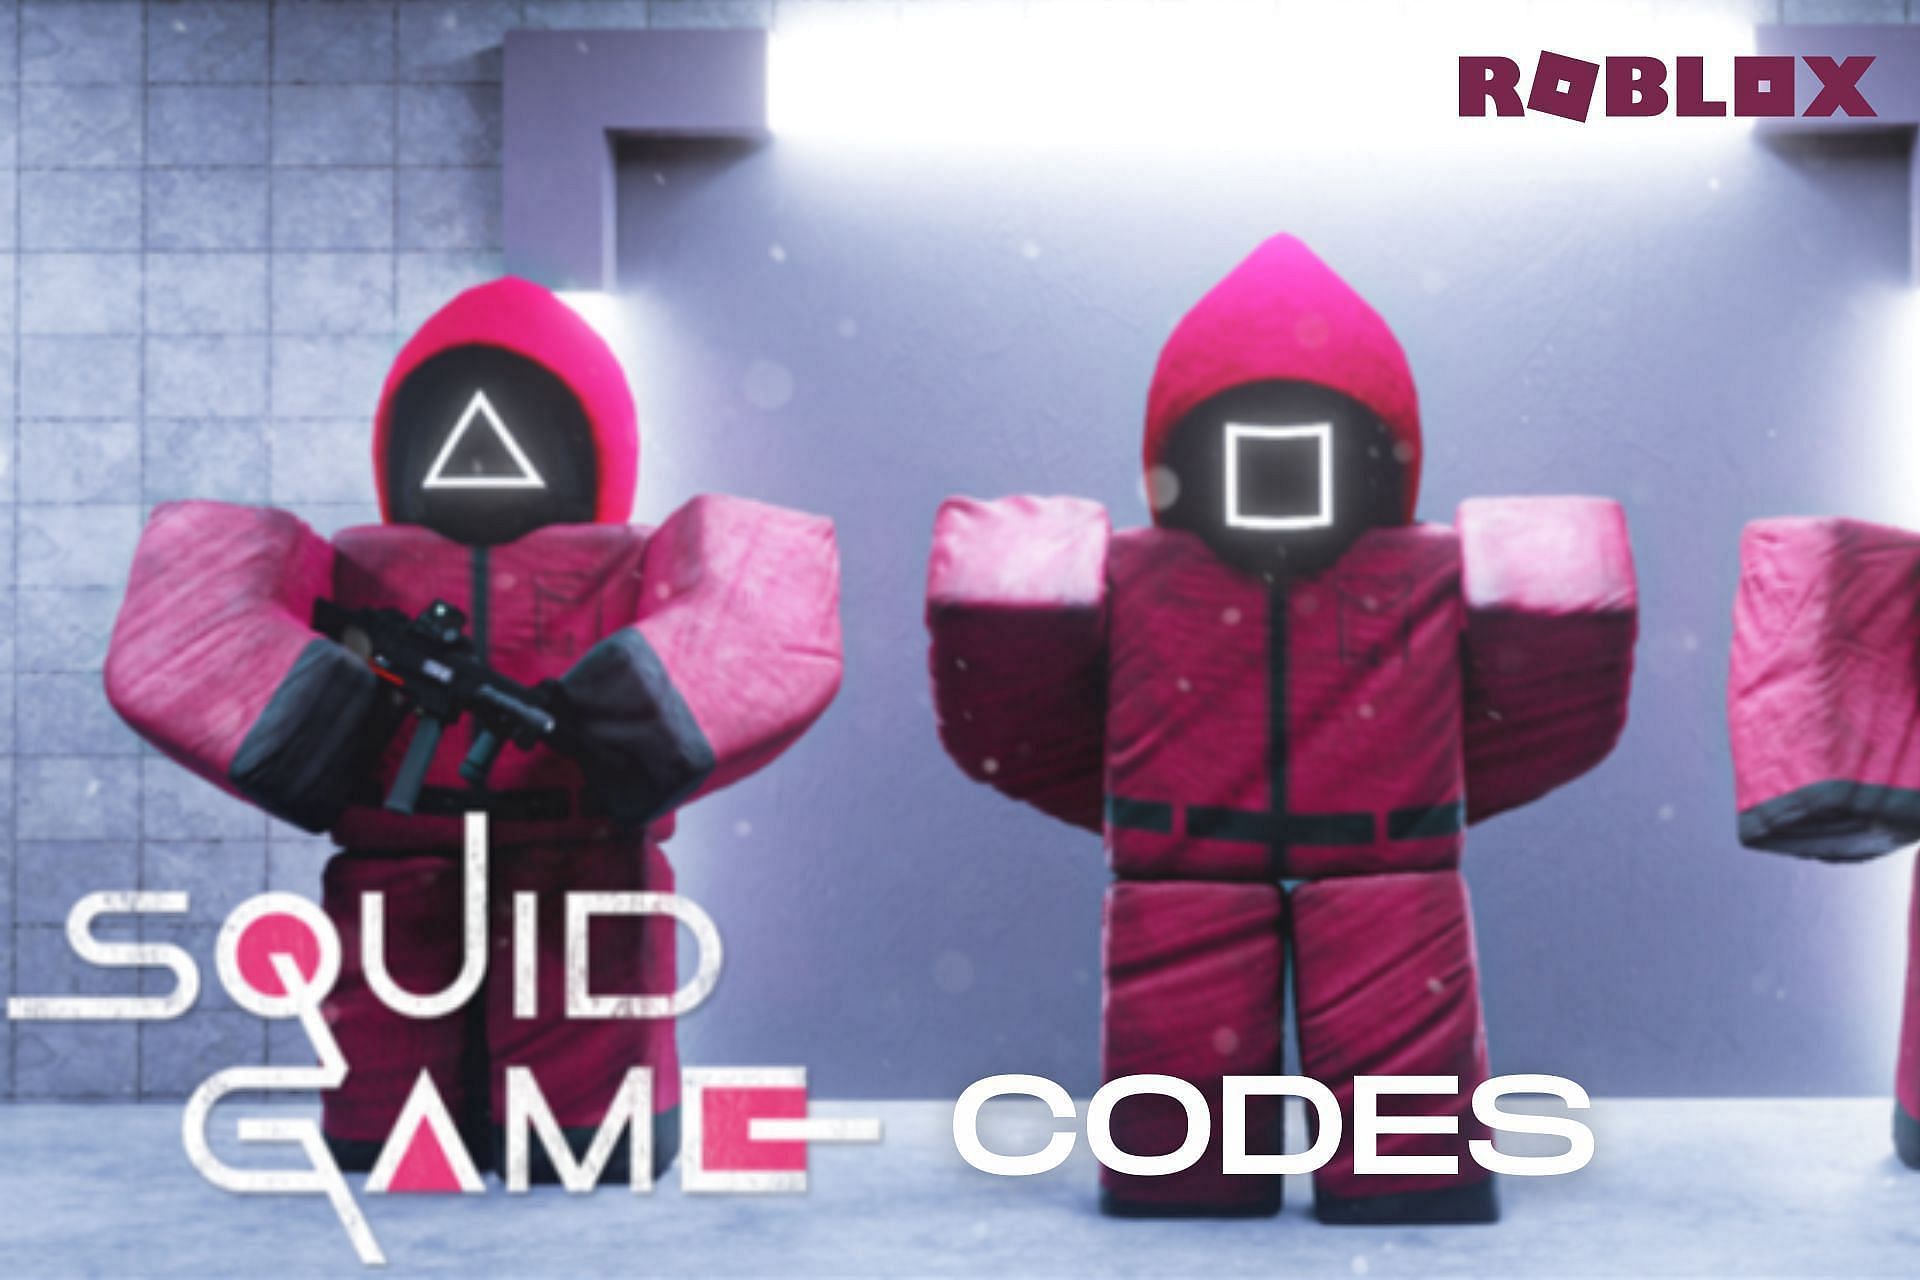 Roblox Squid Game codes (February 2023): Free skins, cash, and more